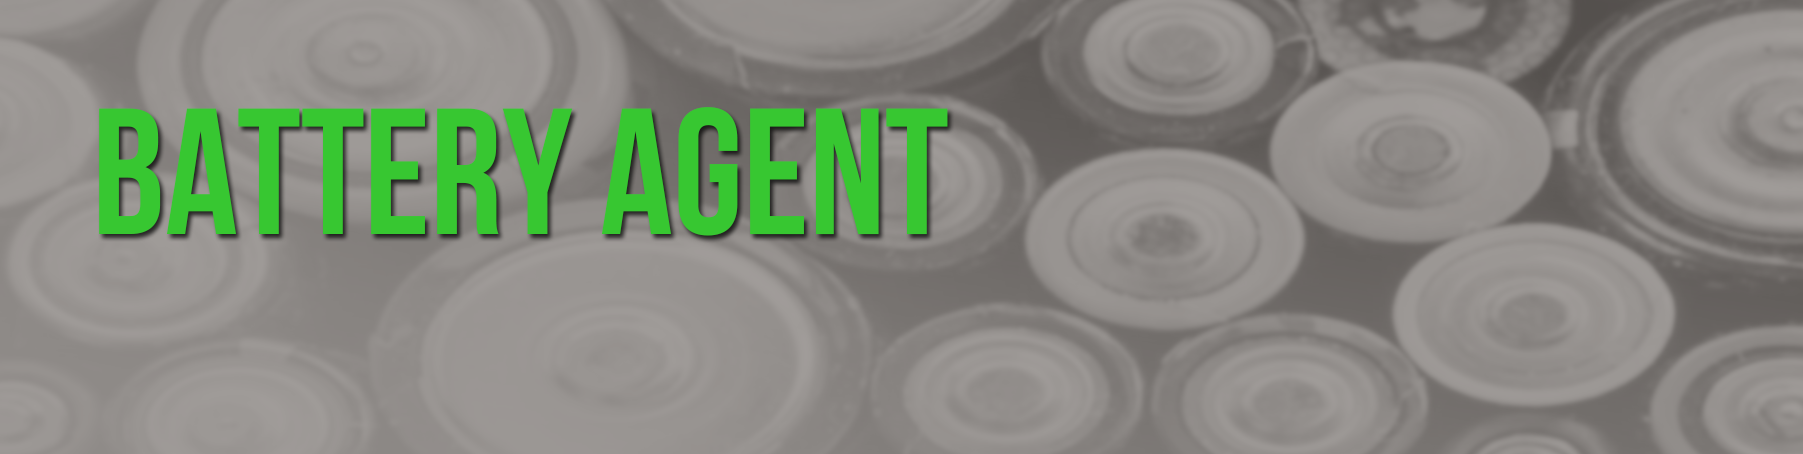 Battery%20Agent.png?1545161150999